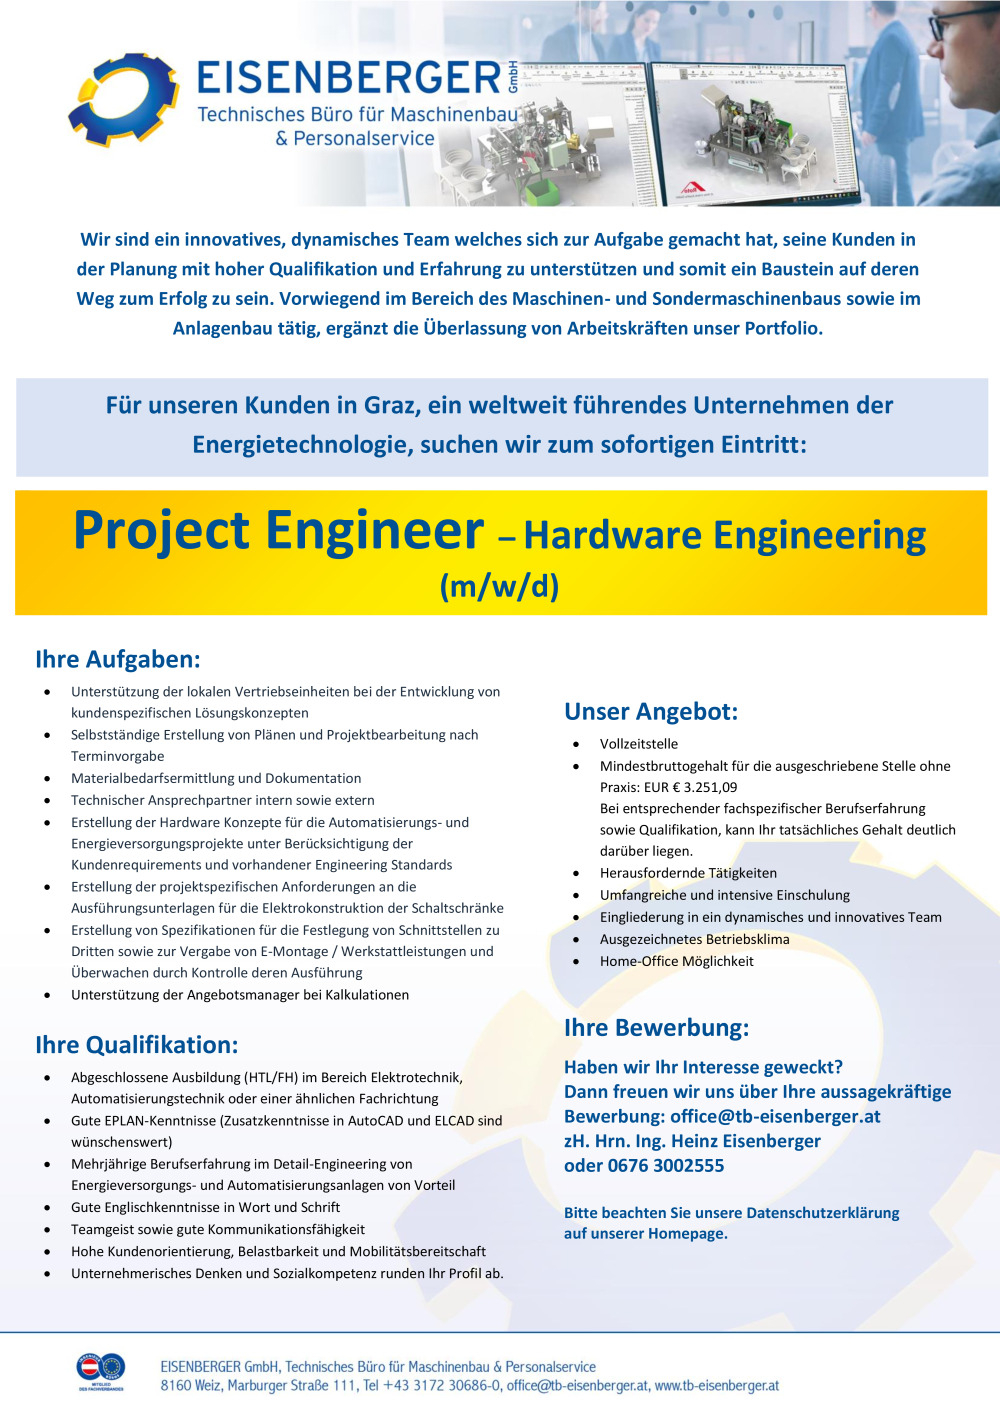 Project Engineer – Hardware Engineering (m/w/d)